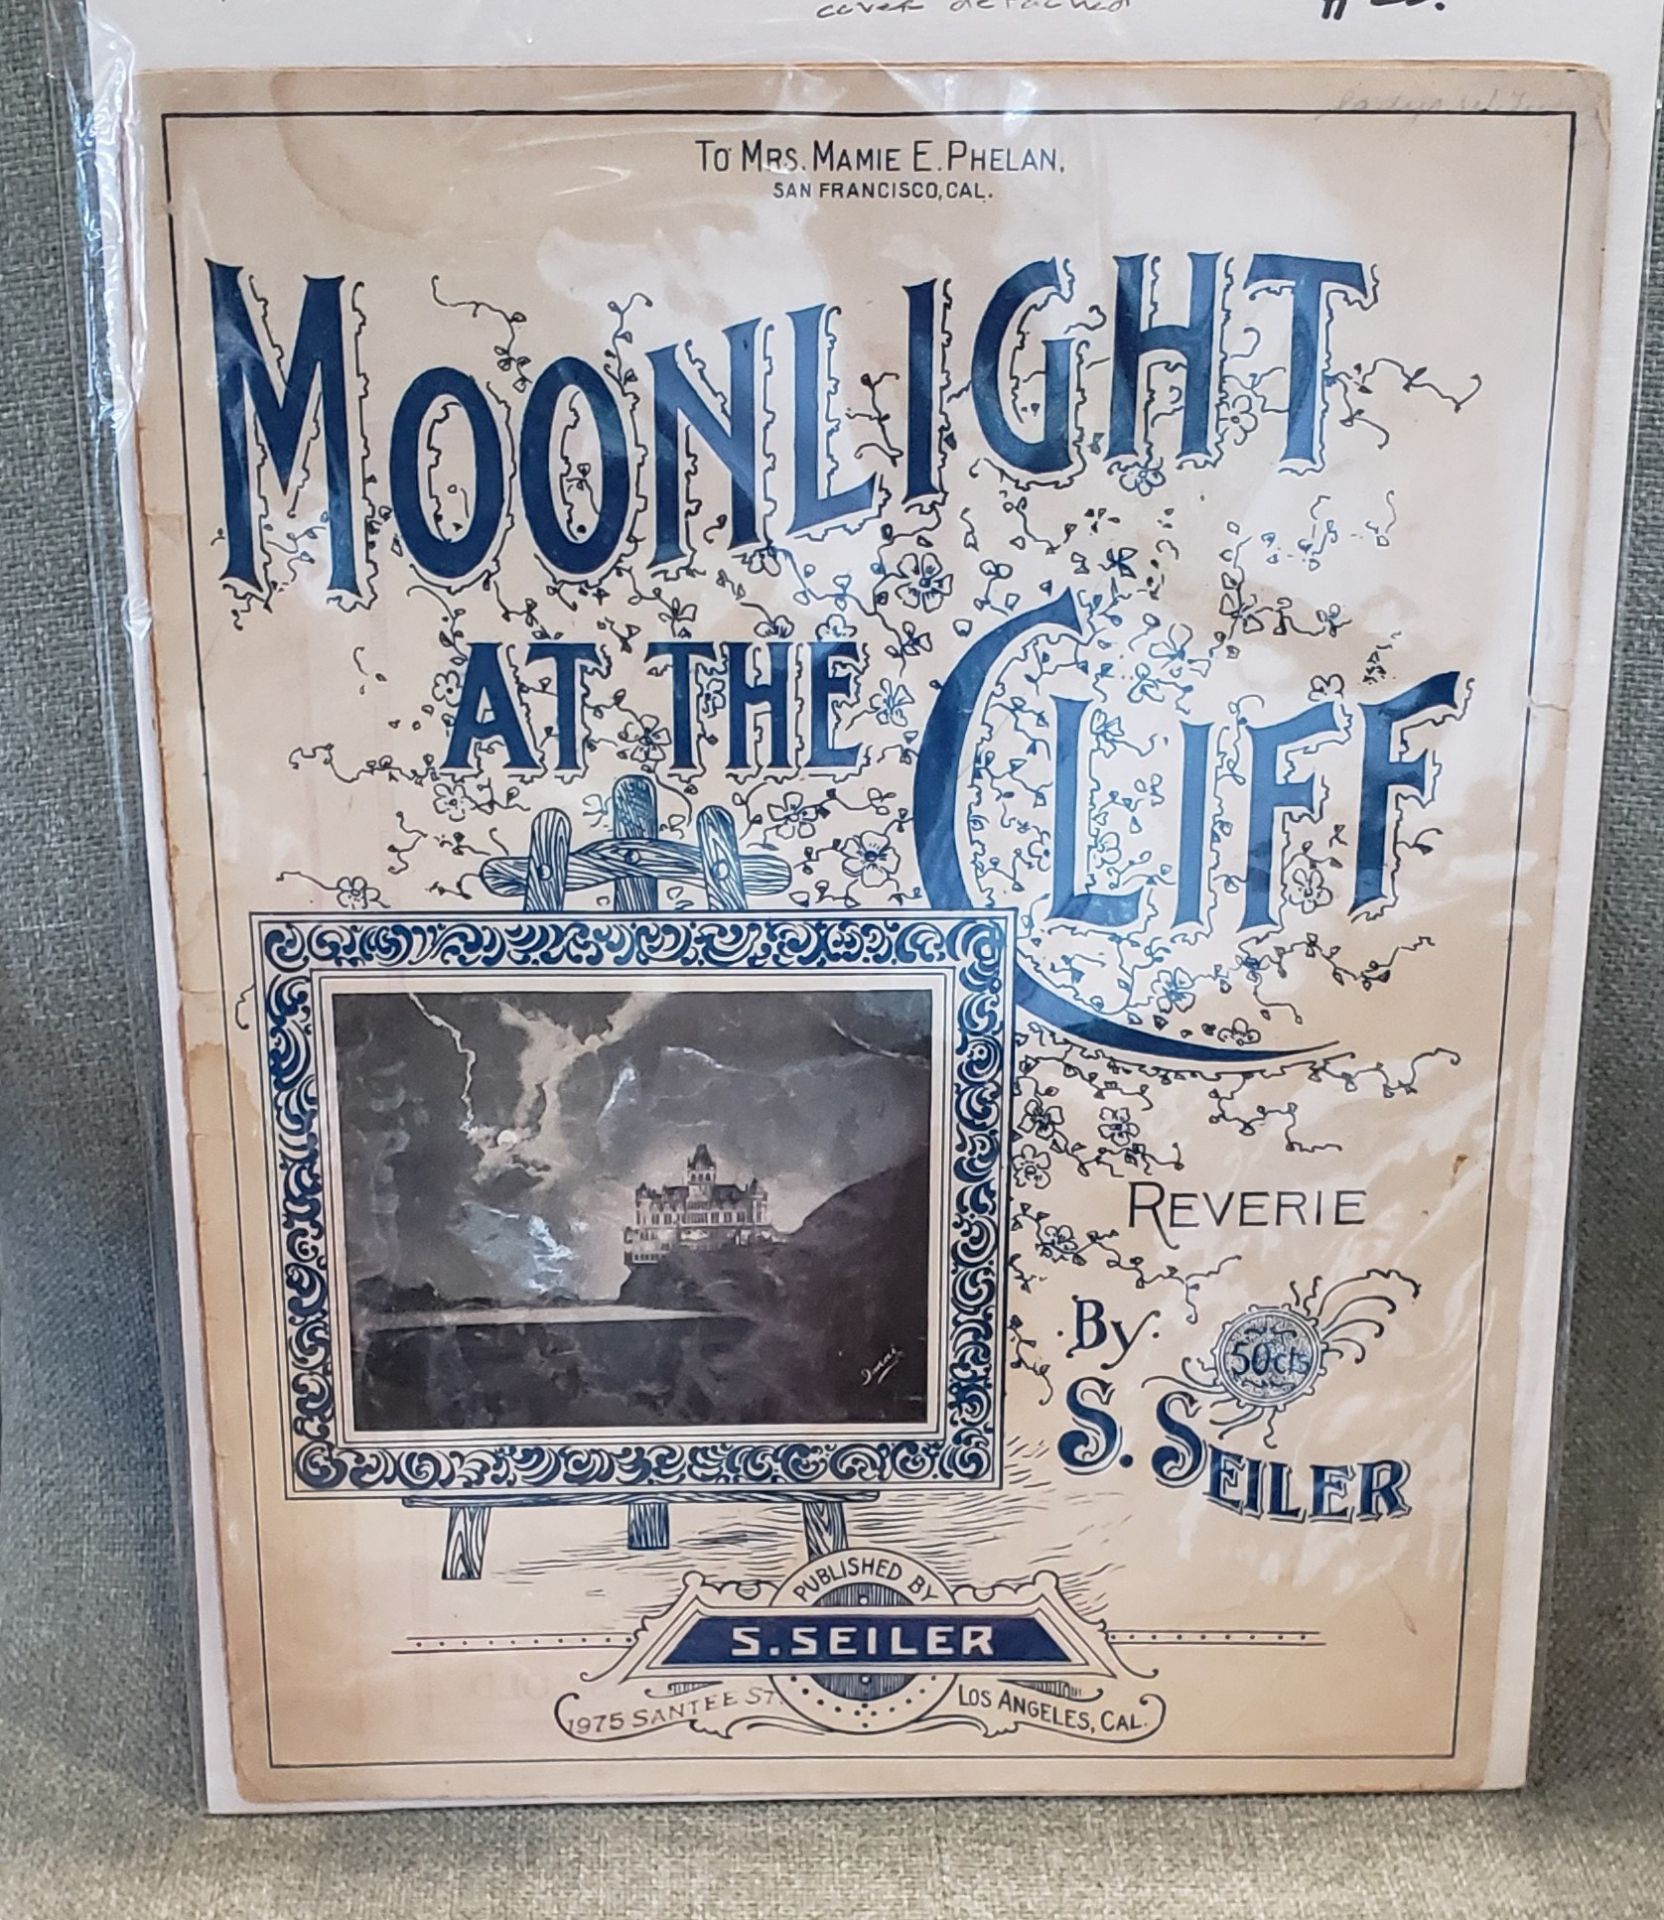 Sheet Music - ""Moonlight at the Cliff"" 1904